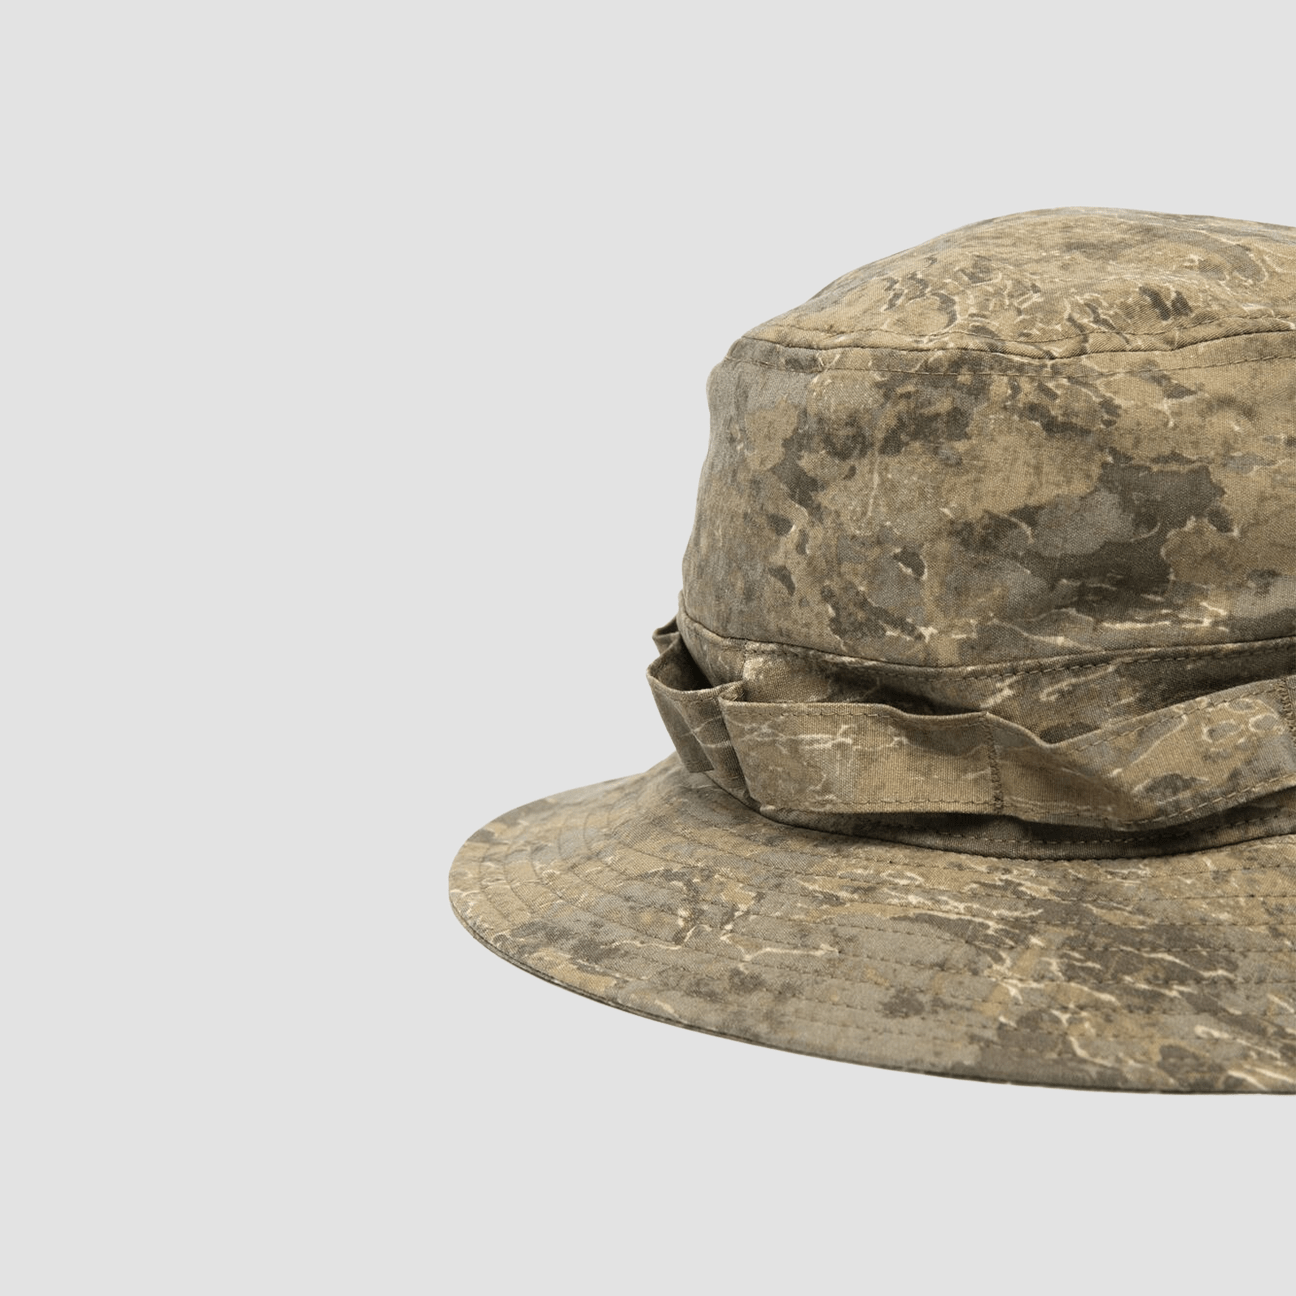 THE NORTH FACE Cappello Bucket Camouflage